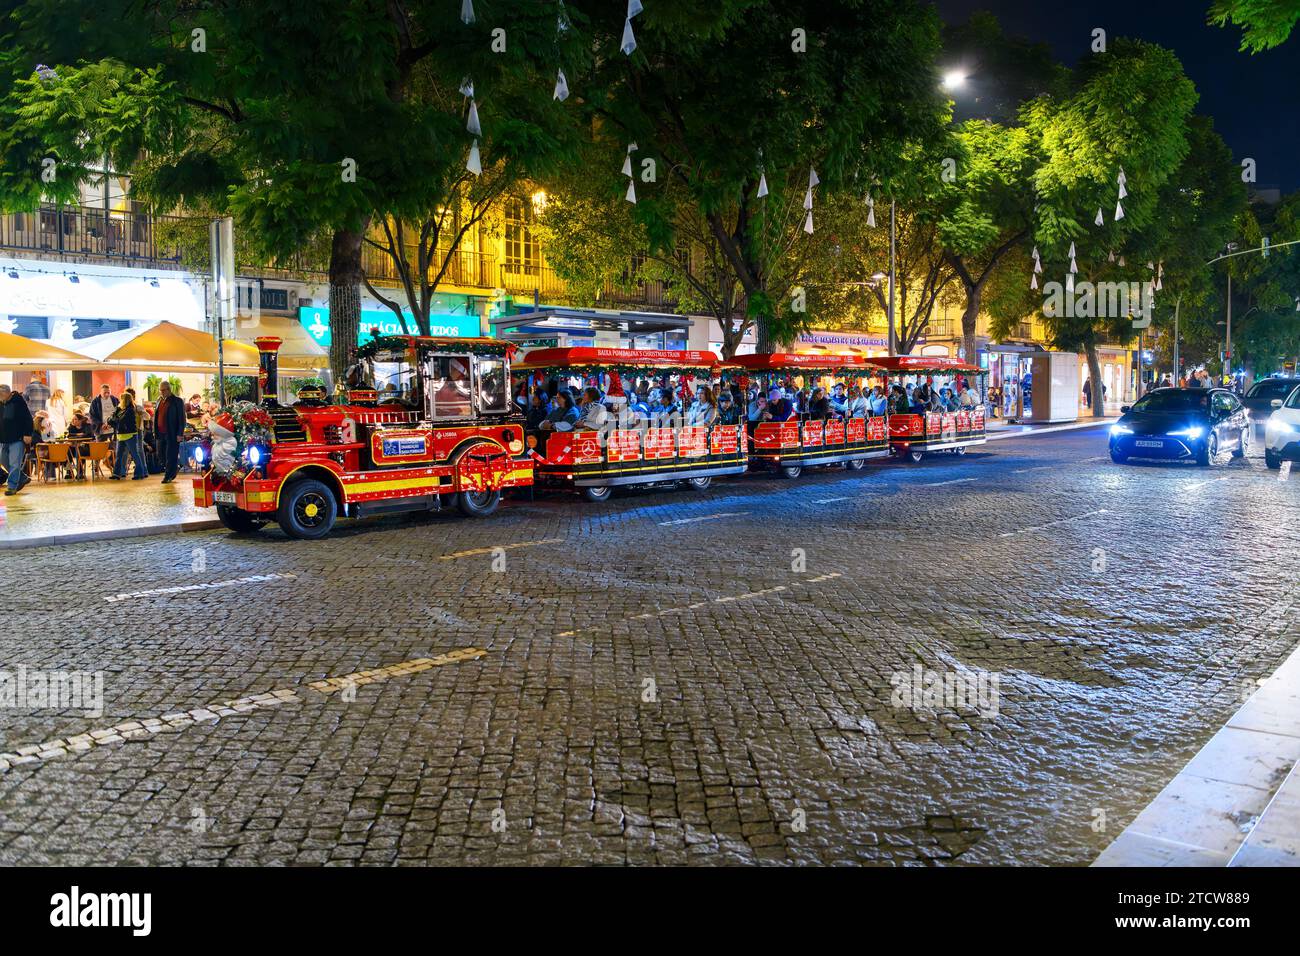 A crowded Christmas Train at the Rossio Square Christmas Market, Mercado de Natal, in the historic center of Lisbon, Portugal. Stock Photo